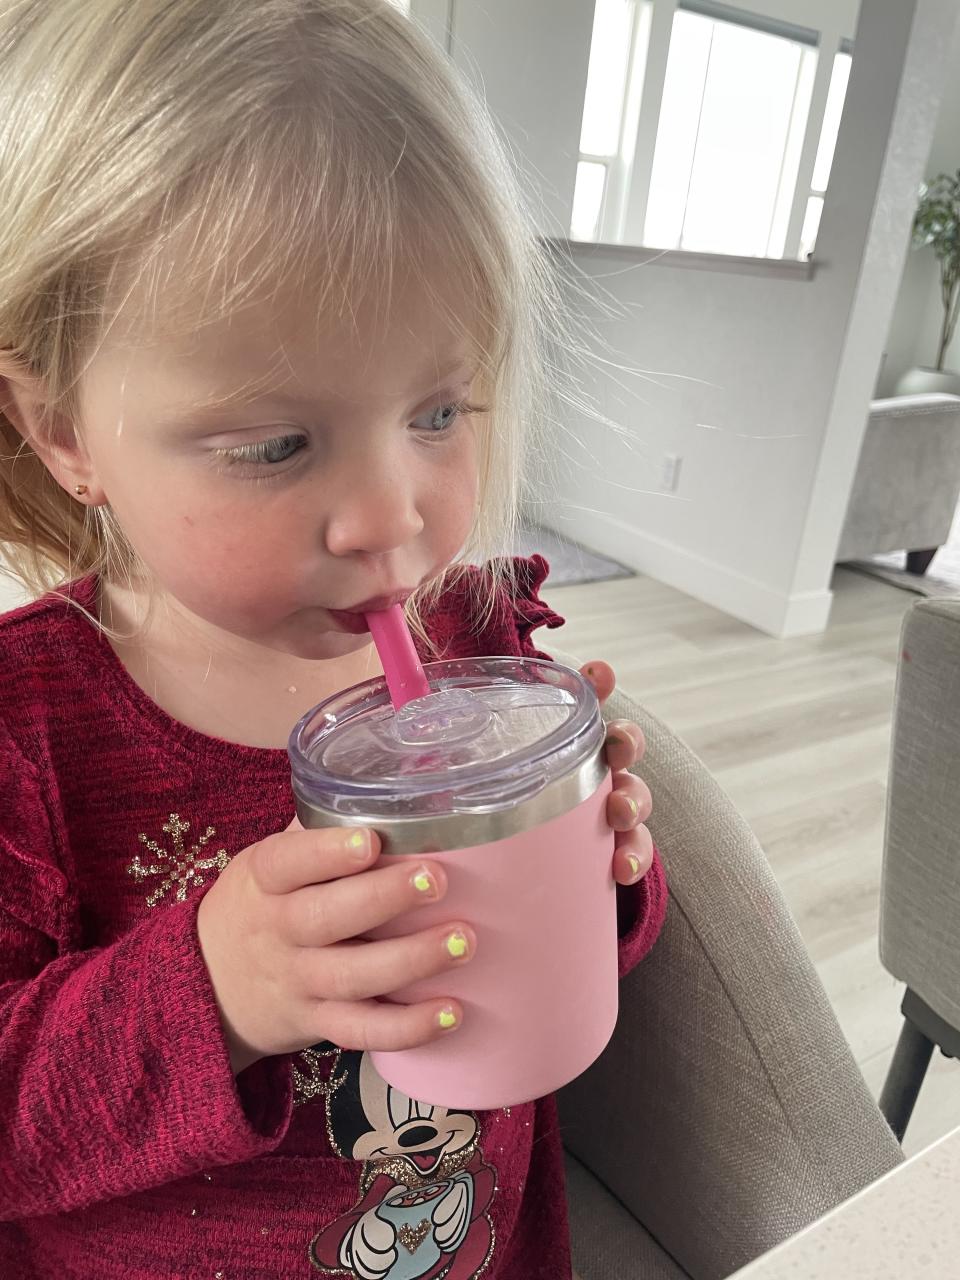 the author's daughter drinking a smoothie